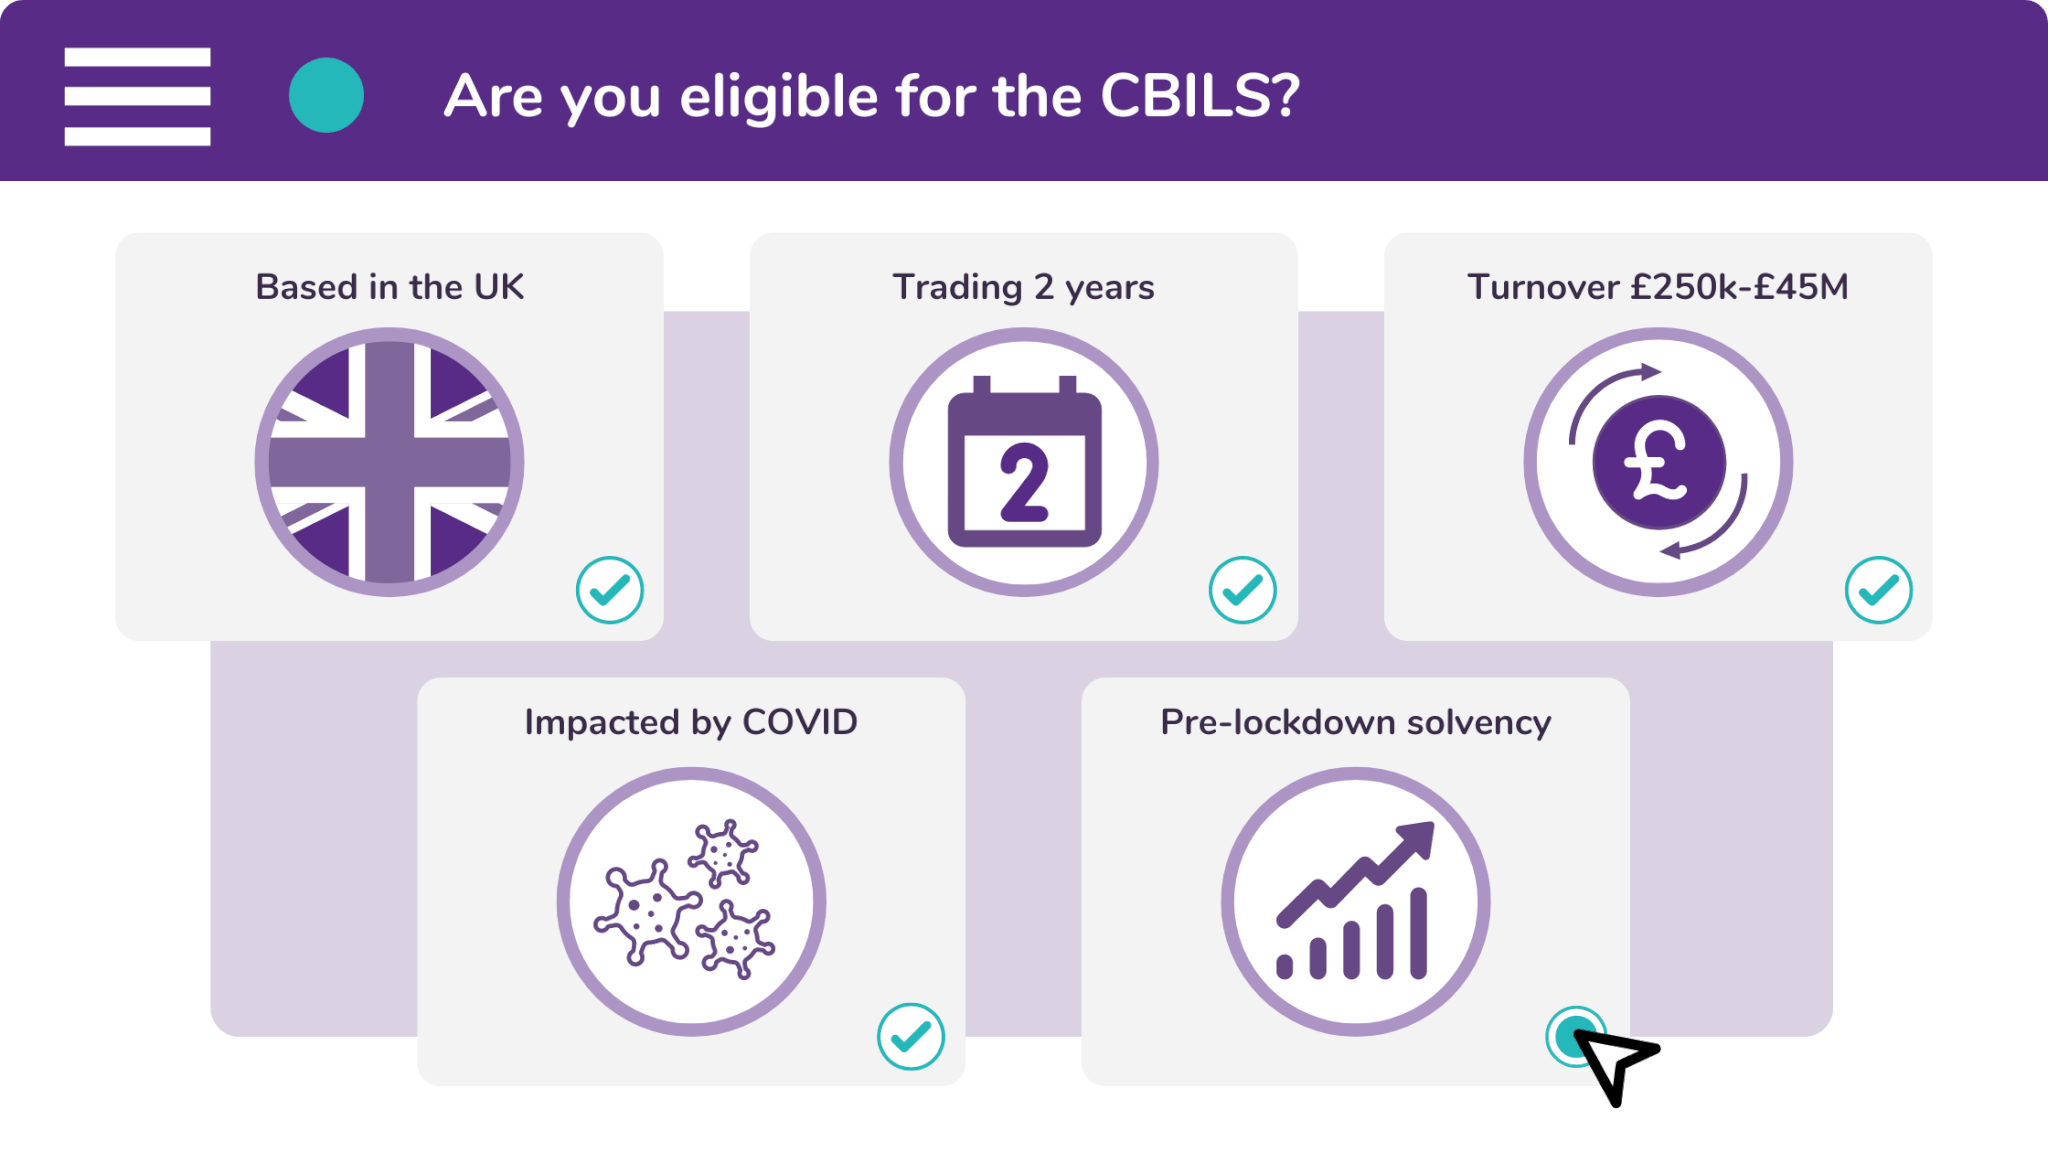 There are five criteria which decide whether someone is eligible for the CBILS.